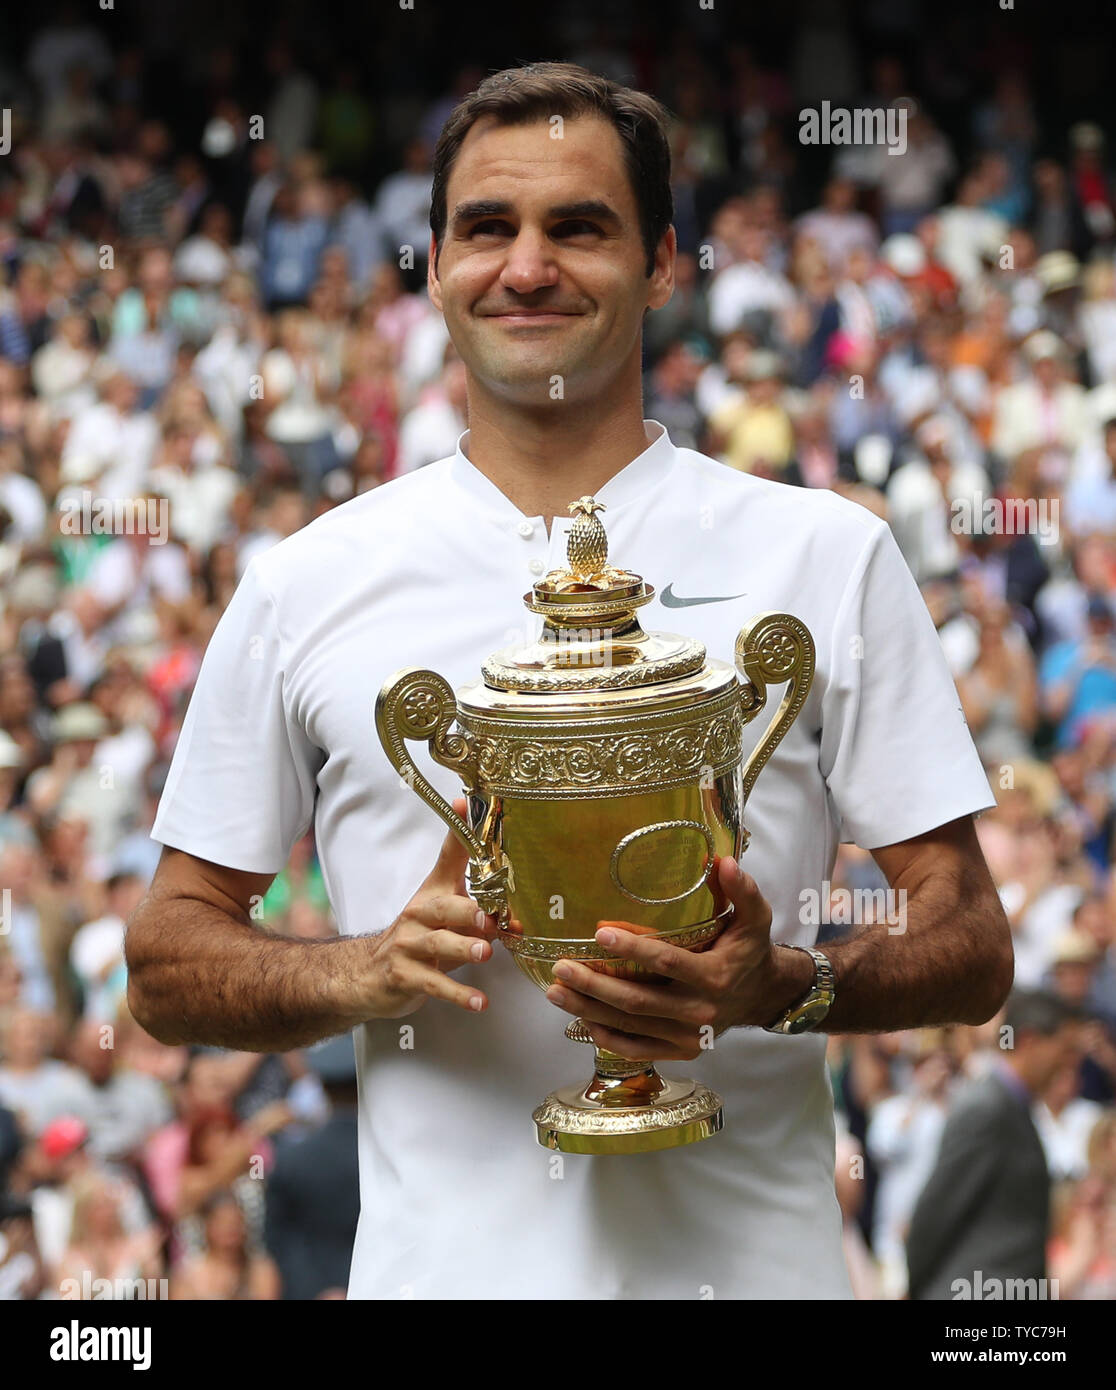 Swiss Roger Federer holds the Wimbledon Singles trophy after victory over  Croat Marin Cilic at the 2017 Wimbledon championships, London on July 16,  2017. Federer beat Cilic 6-3, 6-1, 6-4, to win